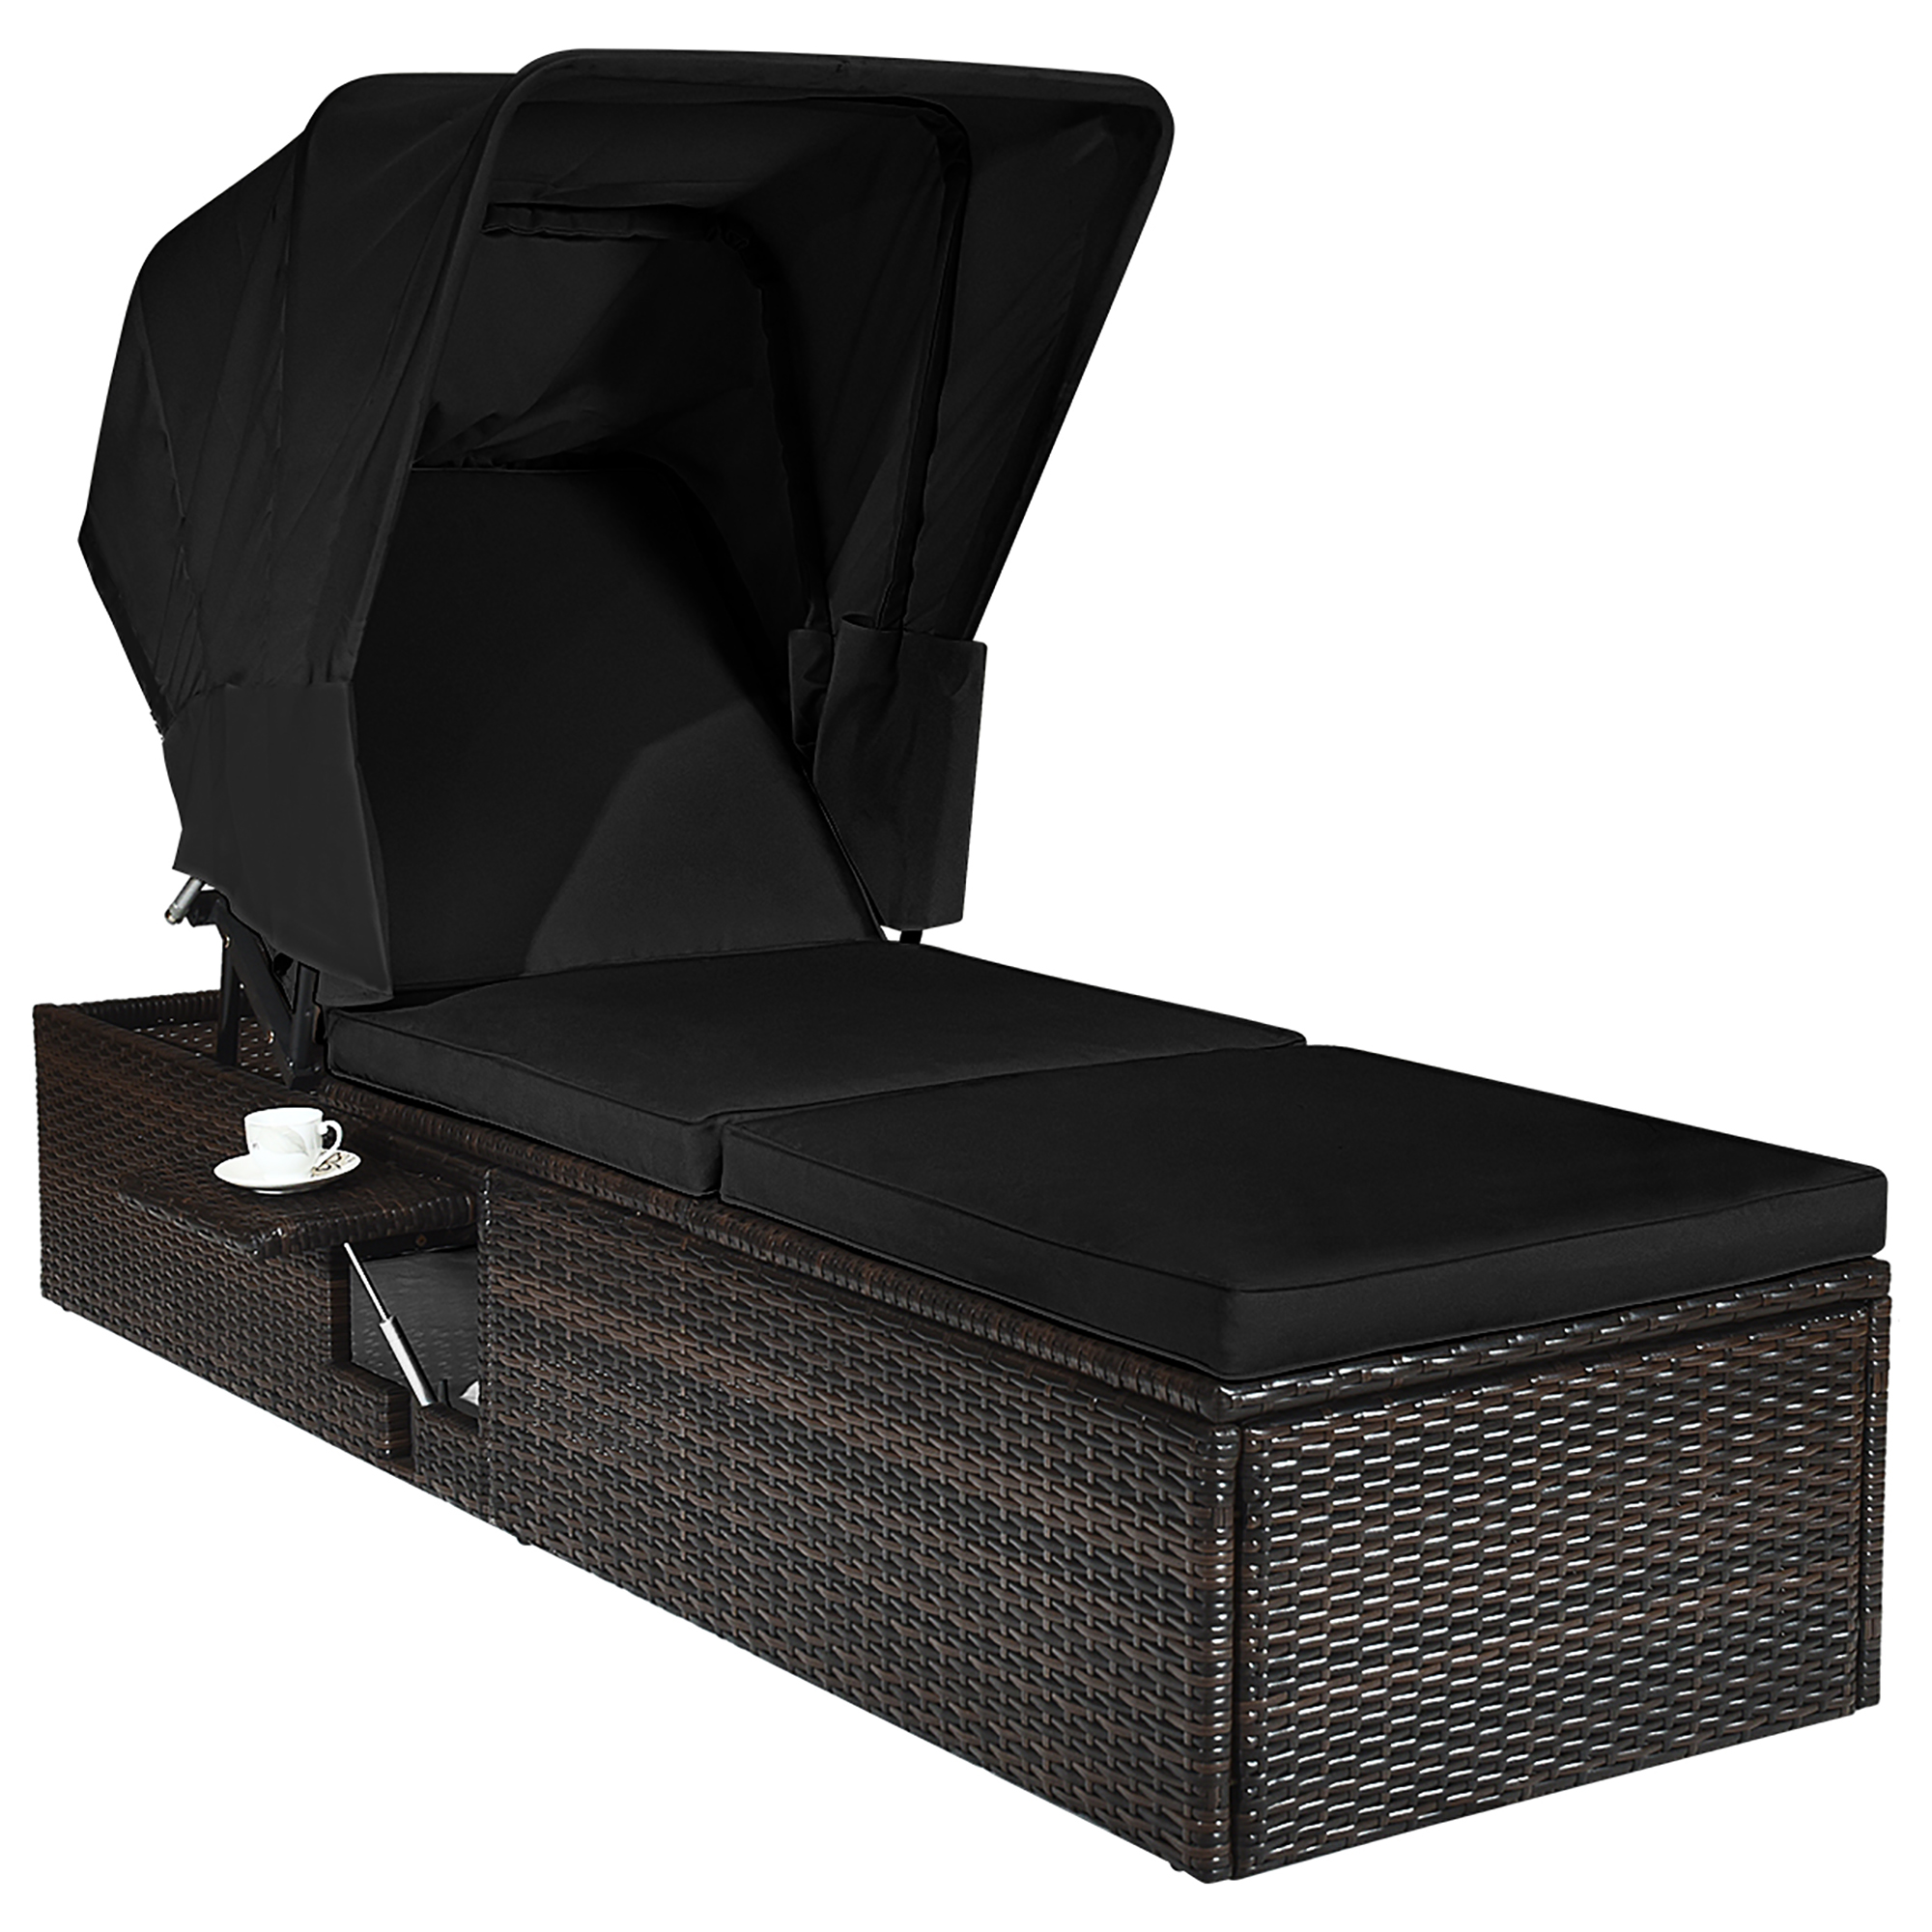 Costway Patio Rattan Lounge Chair Chaise Cushioned Top Canopy Adjustable Tea Table Black - image 3 of 10